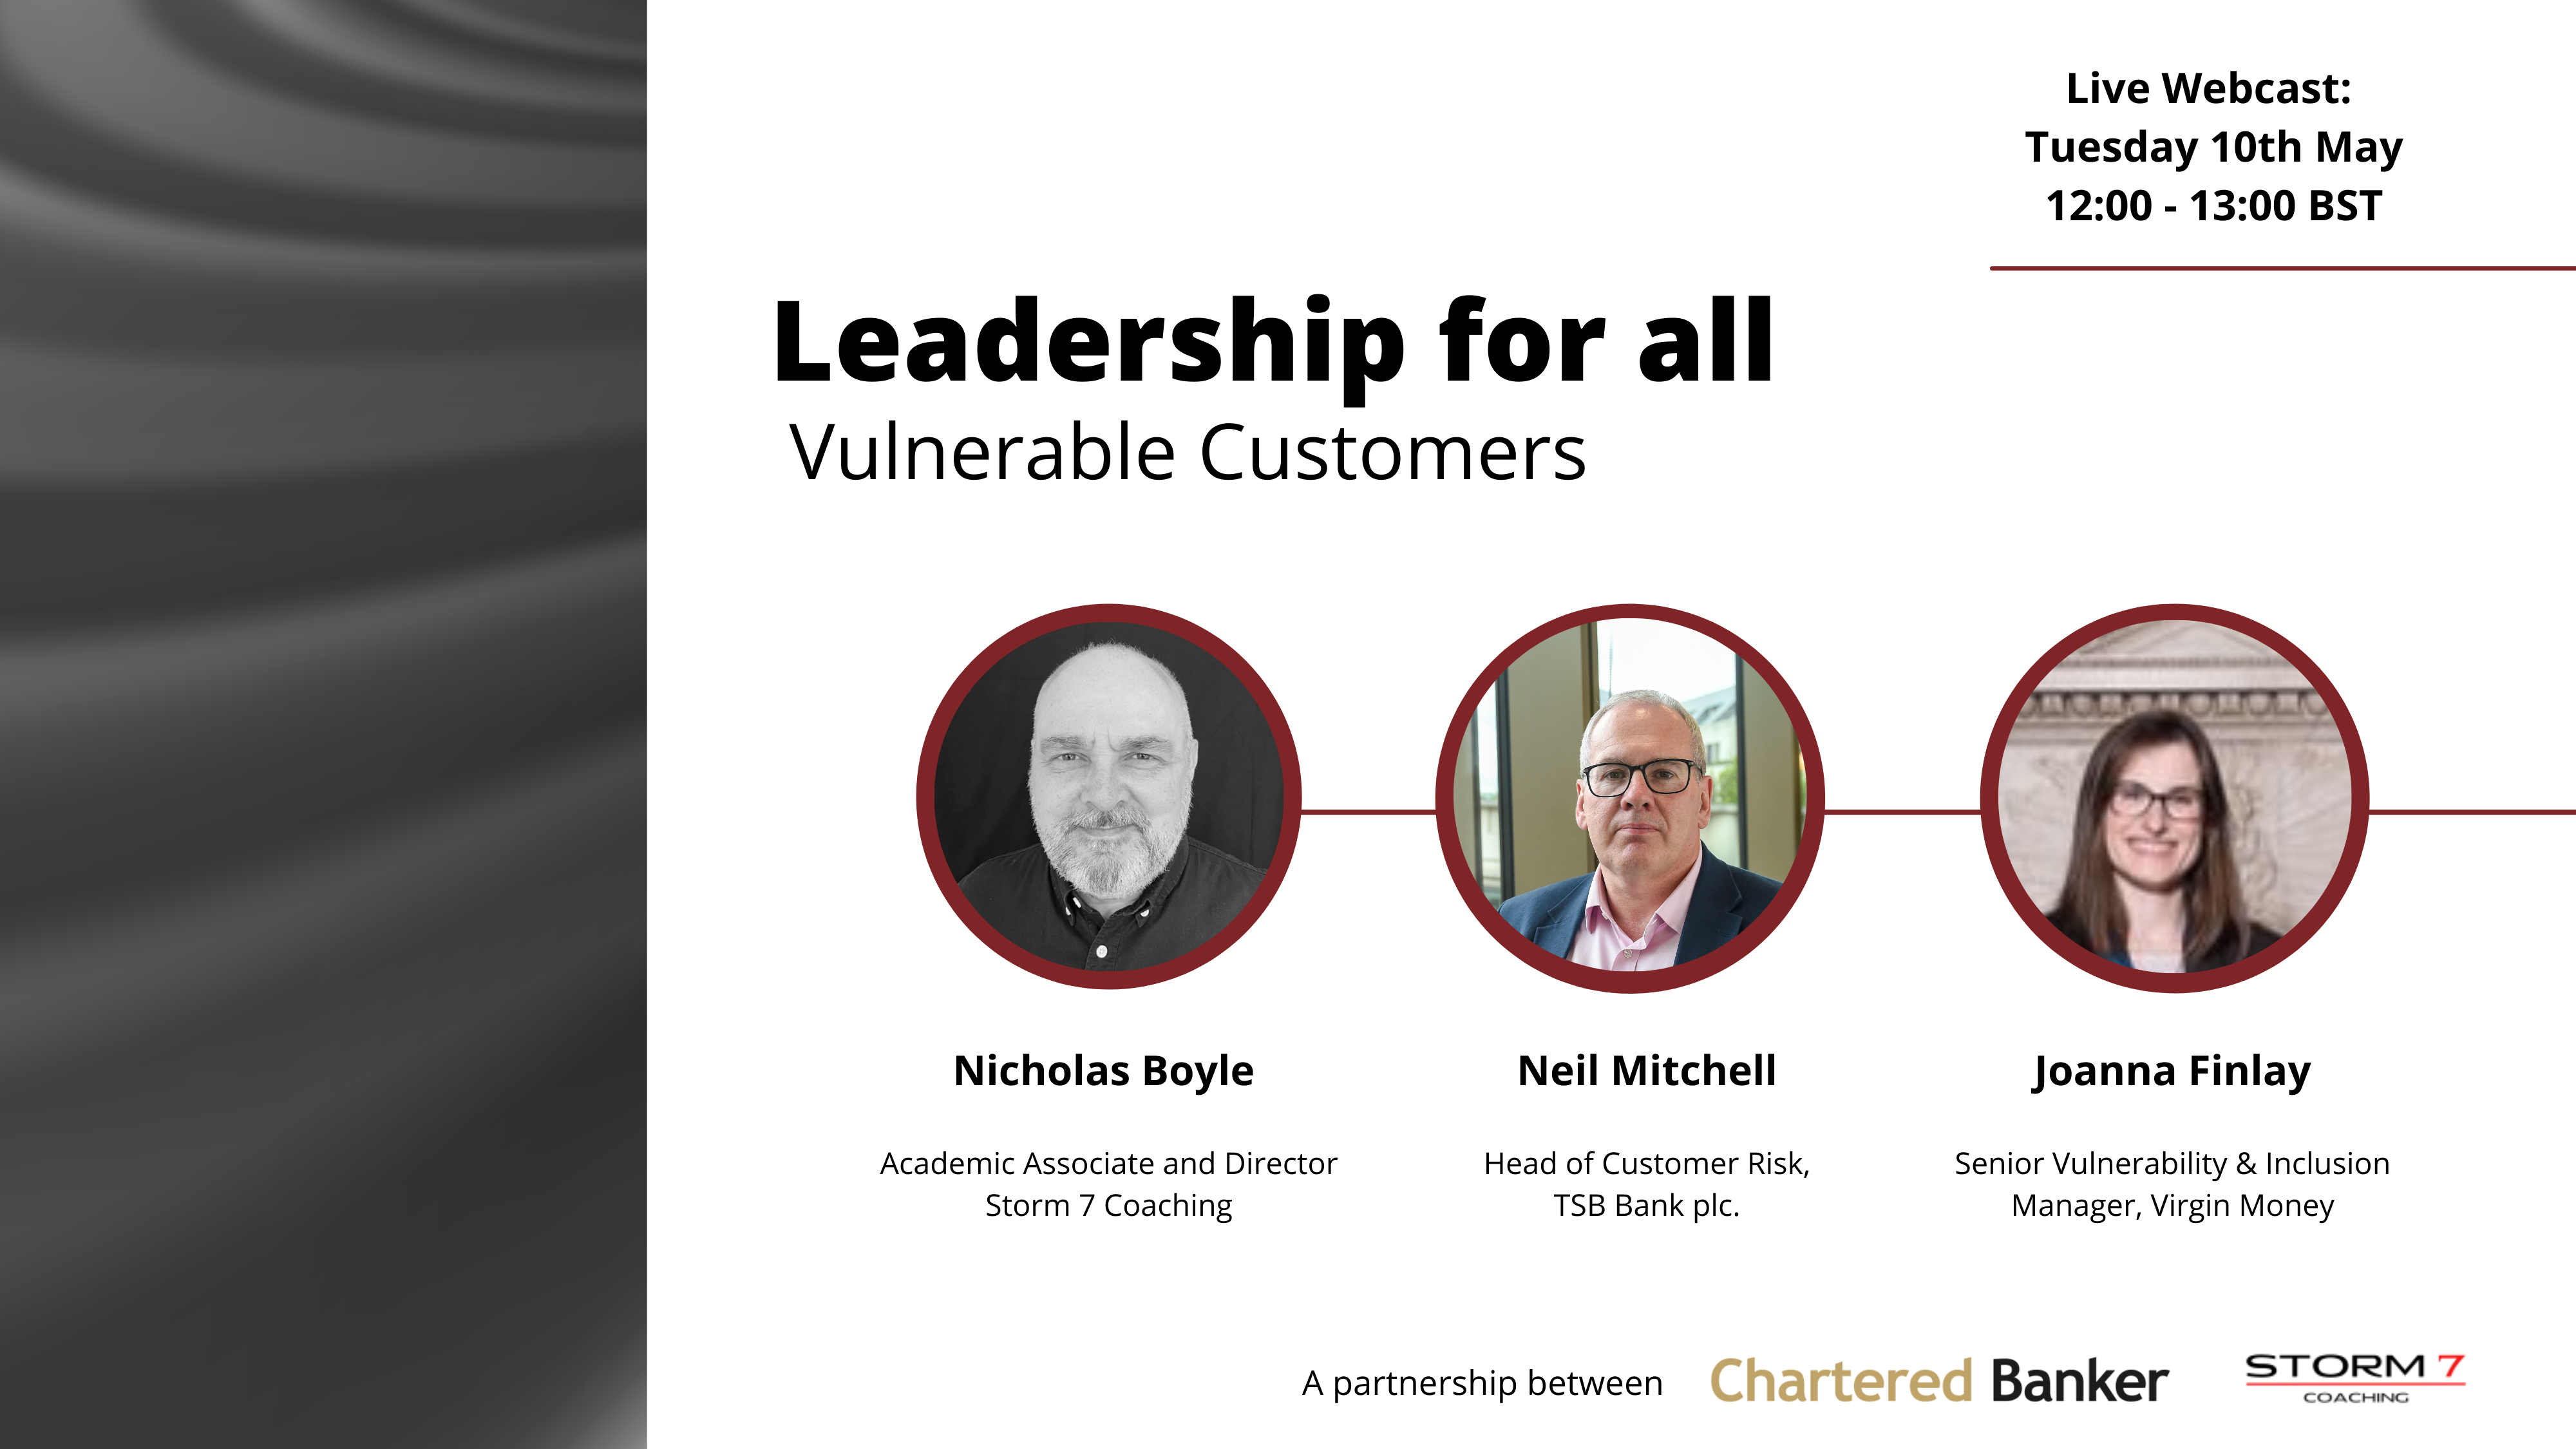 Vulnerable Customers - Leadership for all series